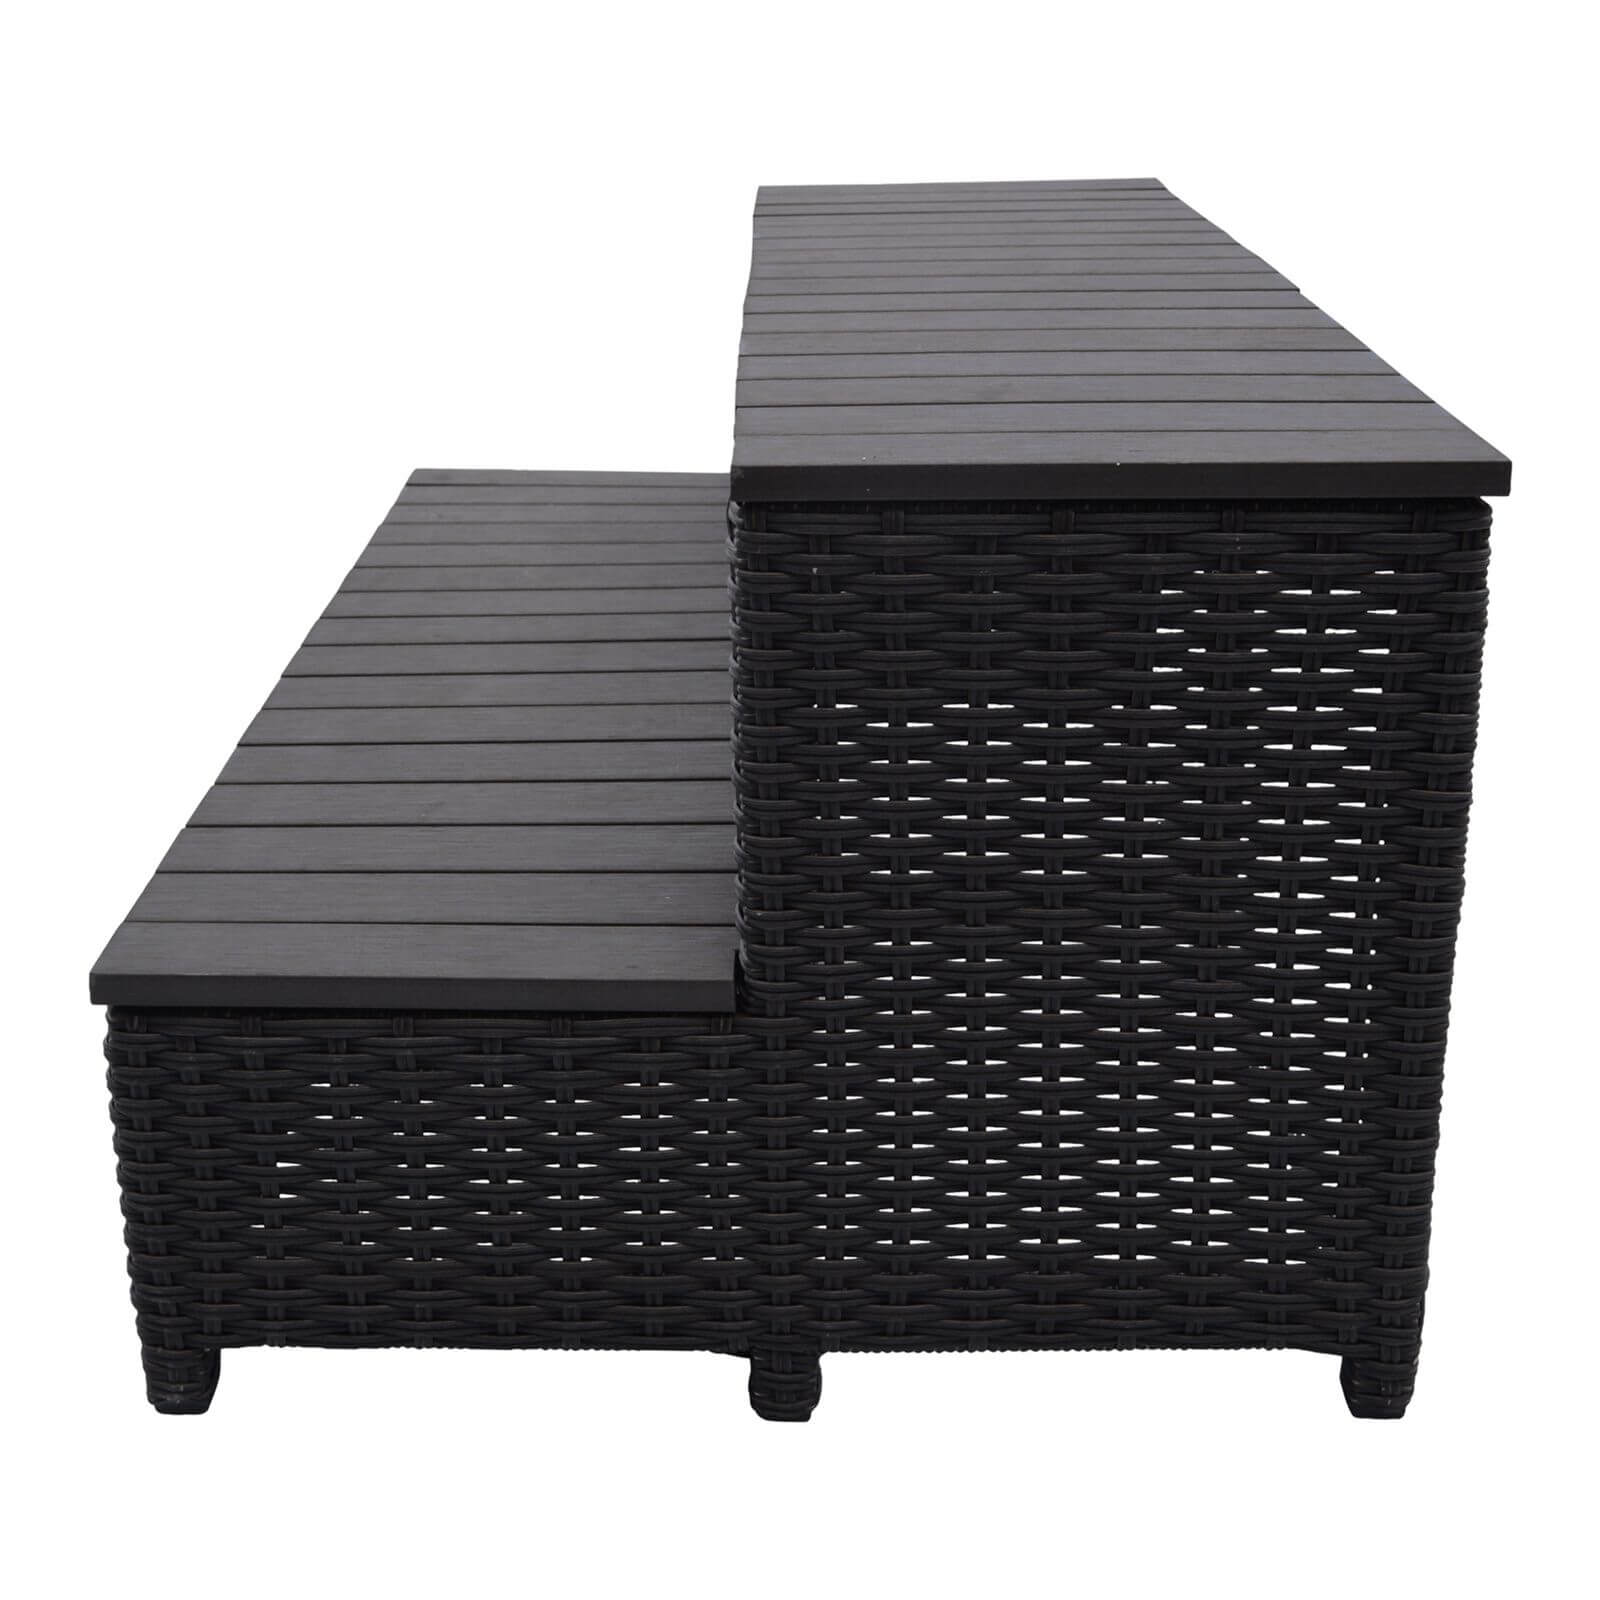 Canadian Spa Rattan Square Spa Step for 79in Hot Tub